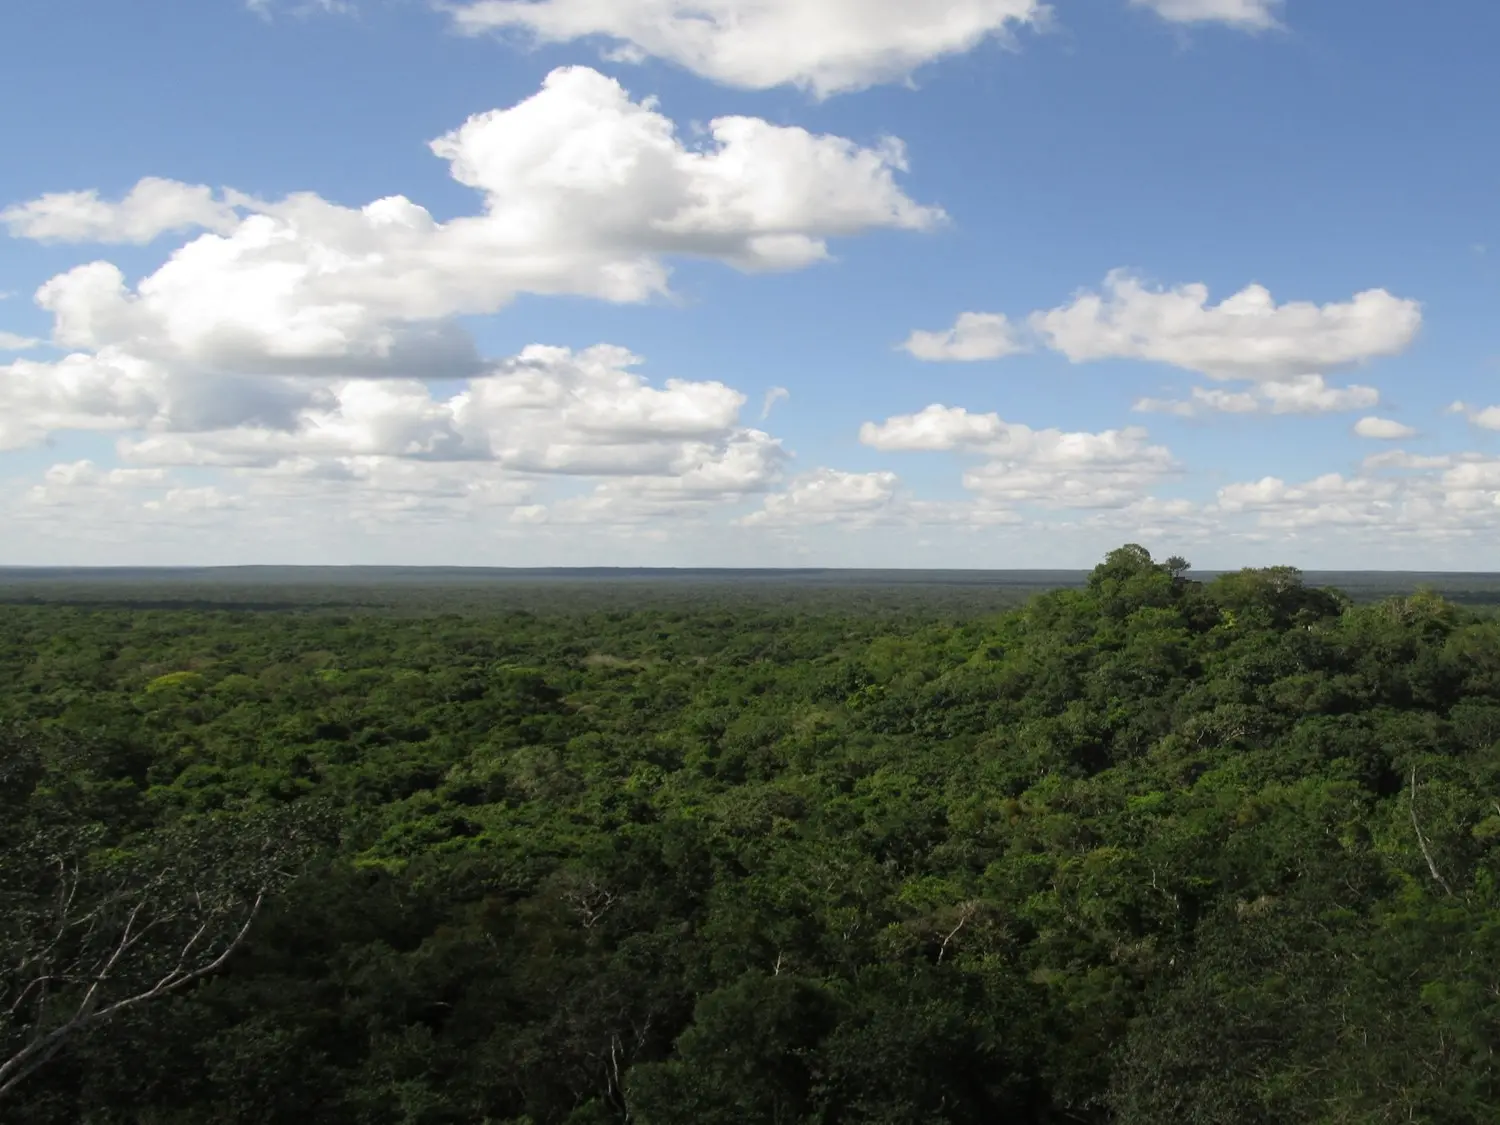 forests at bottom, horizon with blue sky and white clouds at top